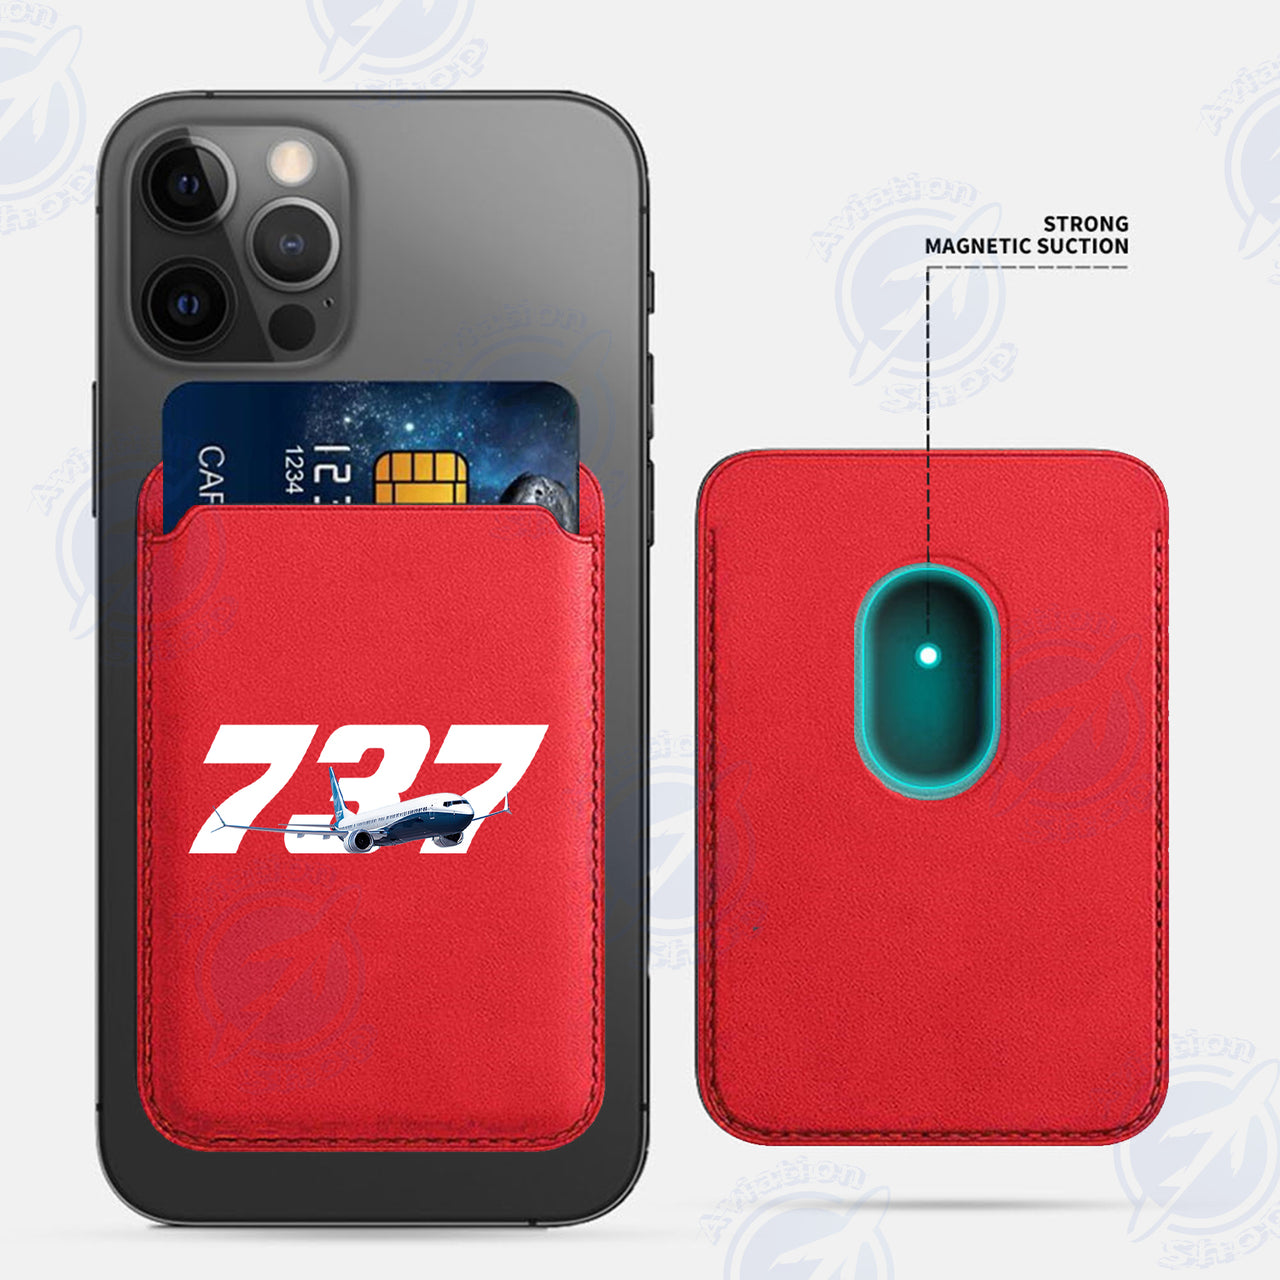 Super Boeing 737 iPhone Cases Magnetic Card Wallet